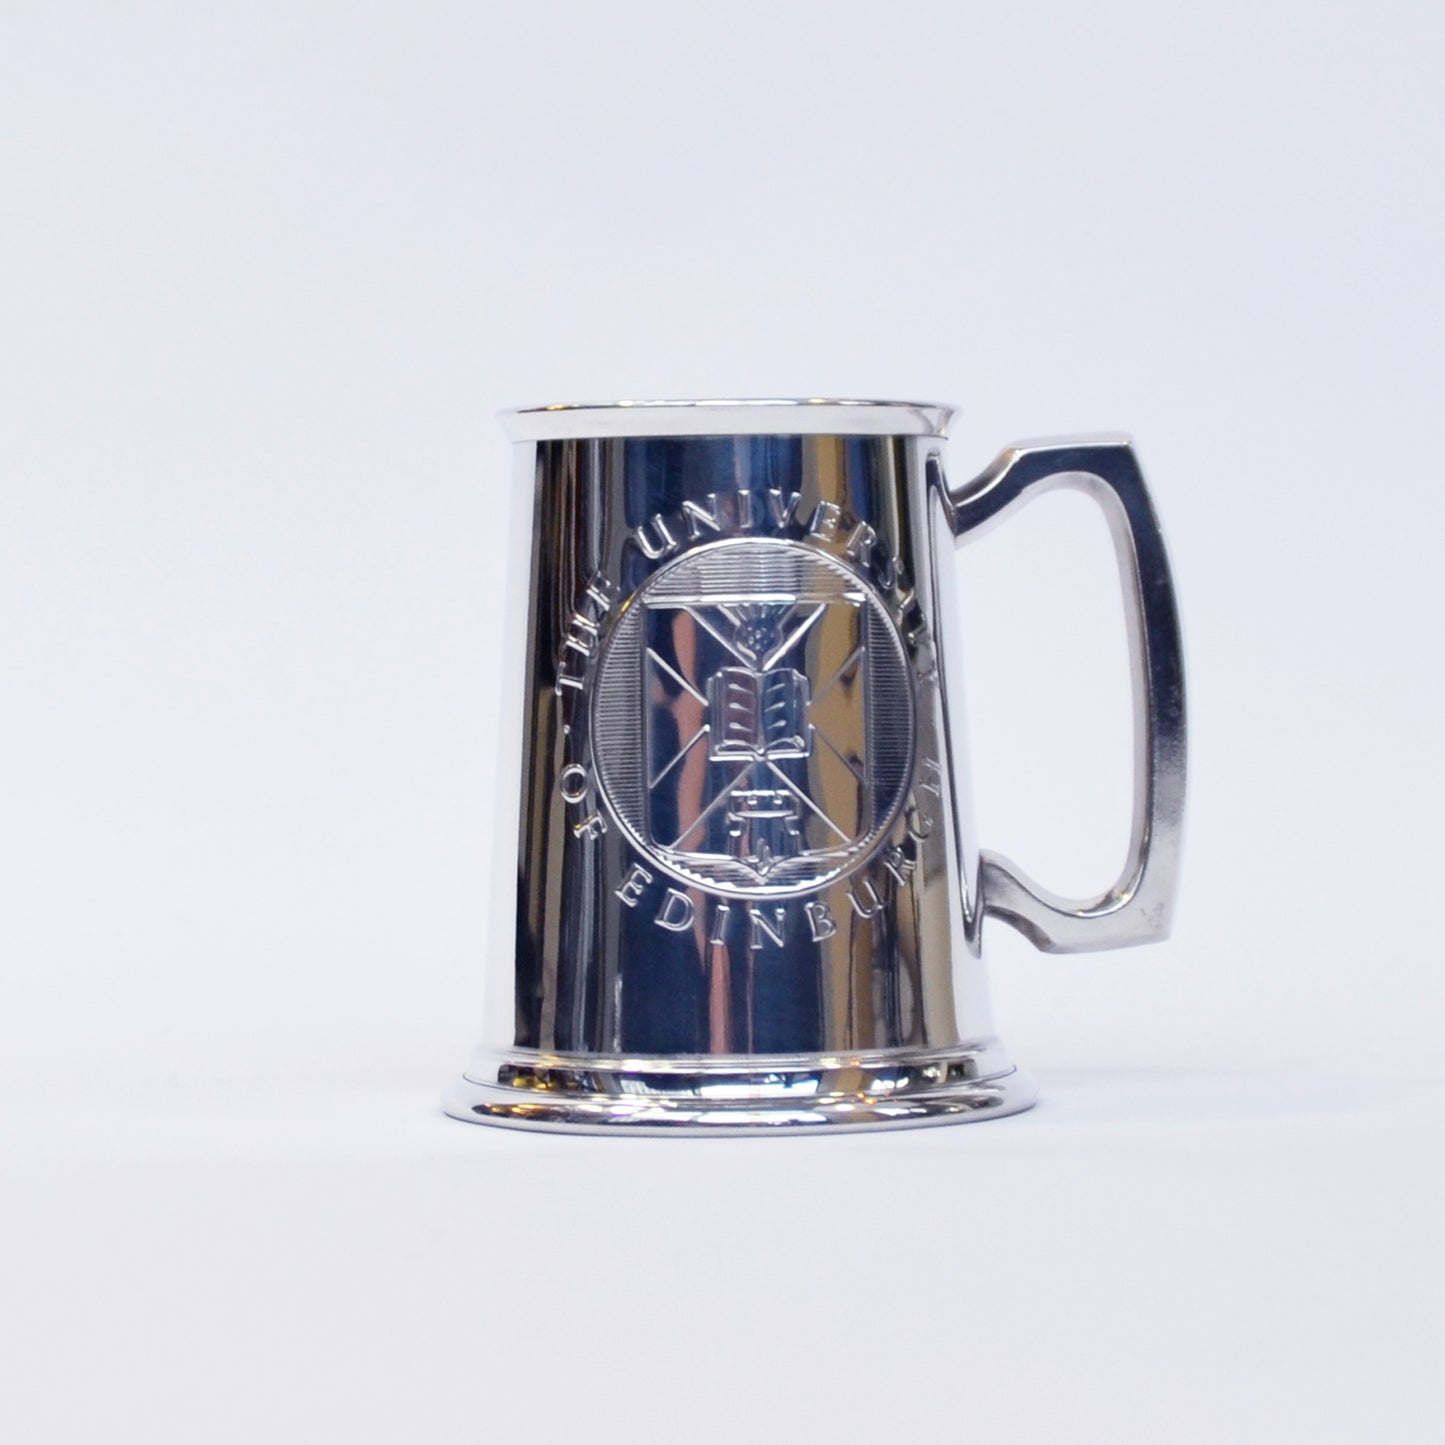 Front view of the pewter tankard, with the University crest visible